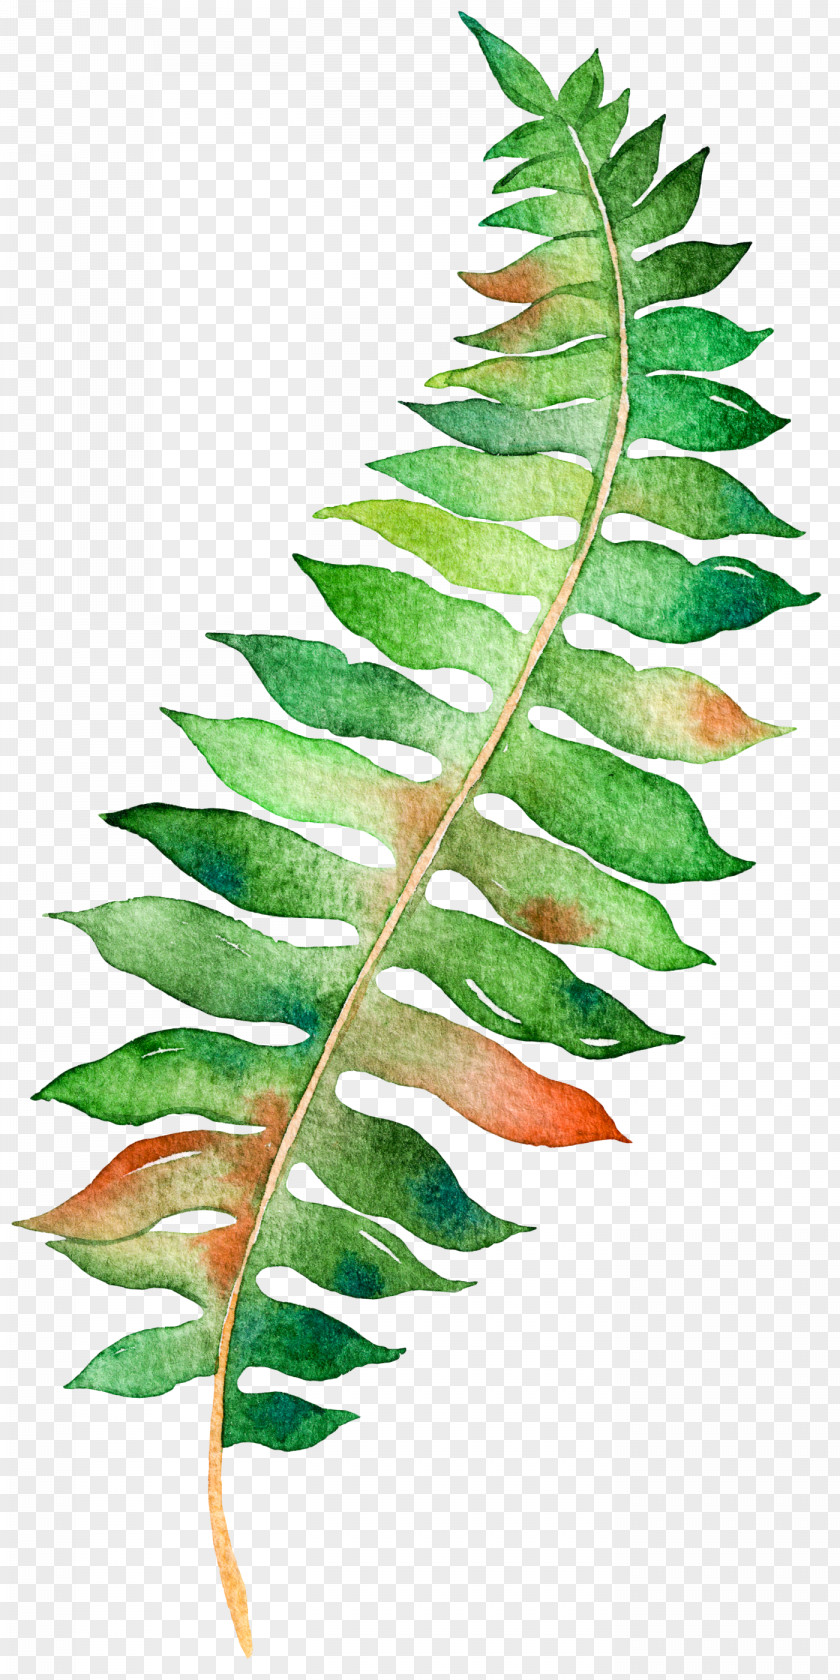 Leaves Paper Poster Watercolor Painting Illustration PNG